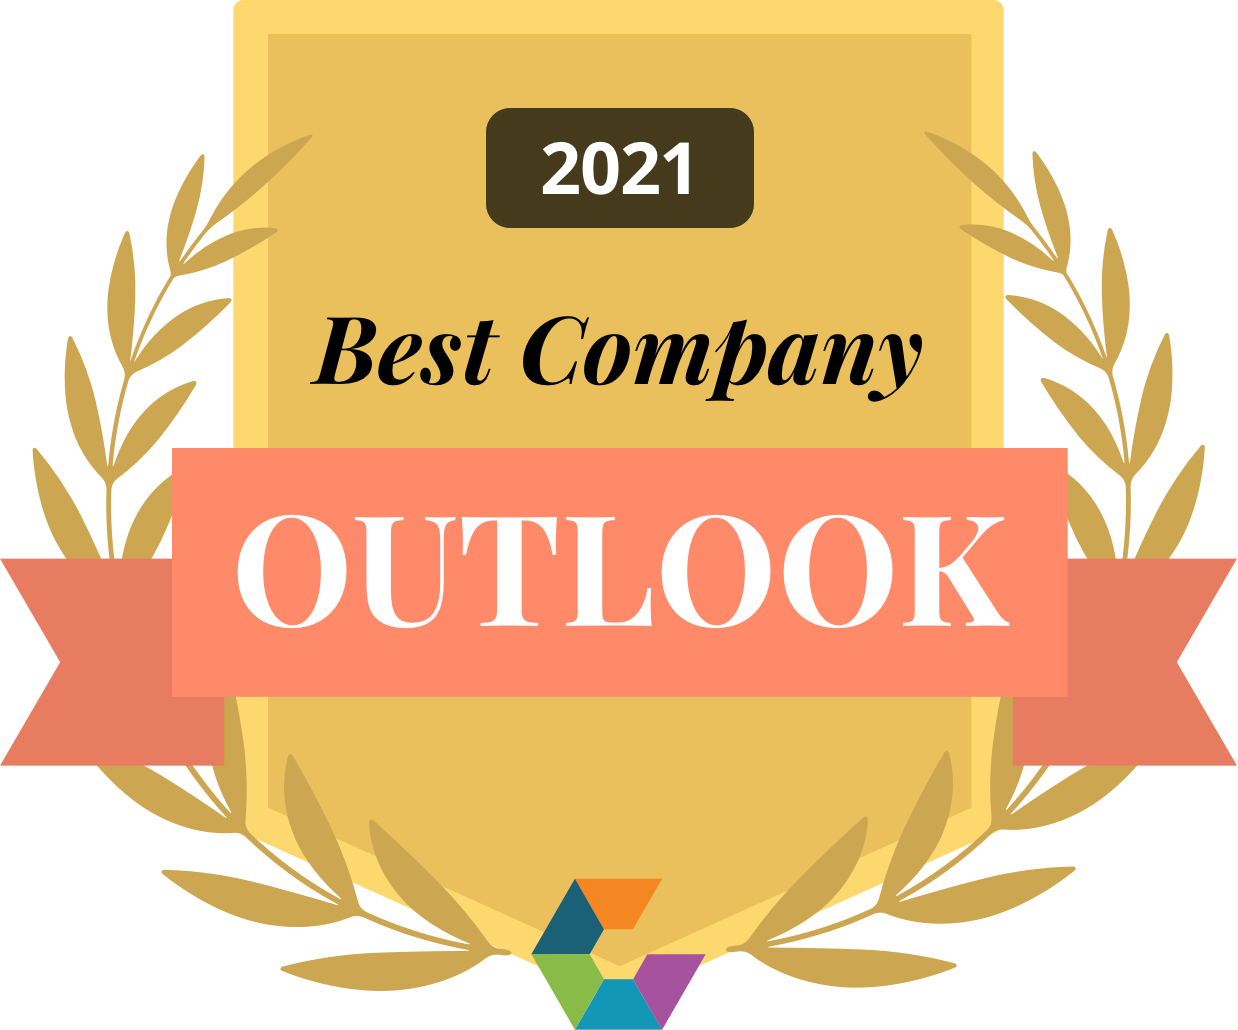 Comparably Award | Top Rated Outlook of 2021 | Smartsheet